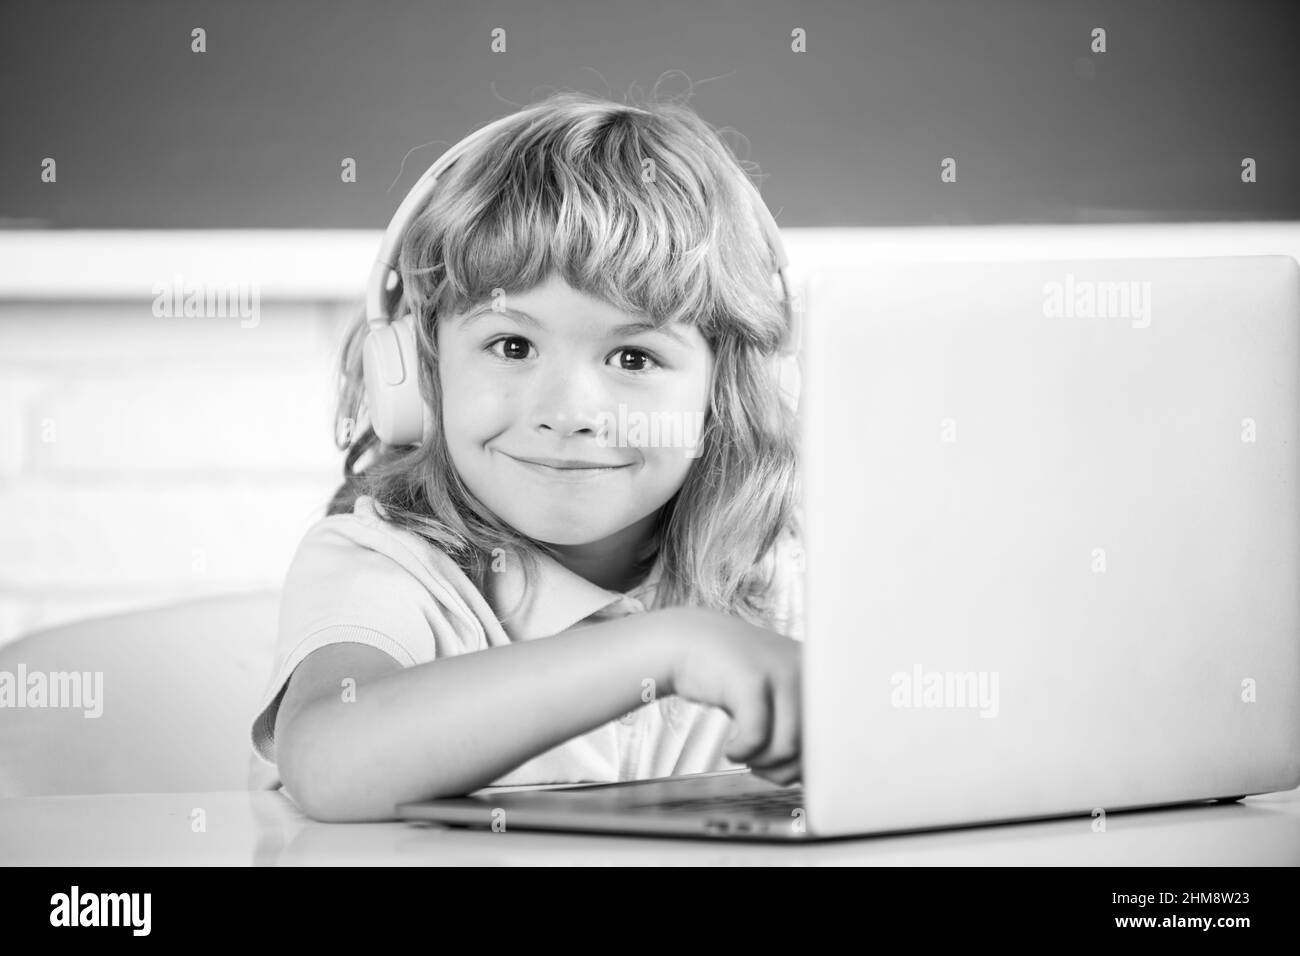 Computer class headphones Black and White Stock Photos & Images - Alamy